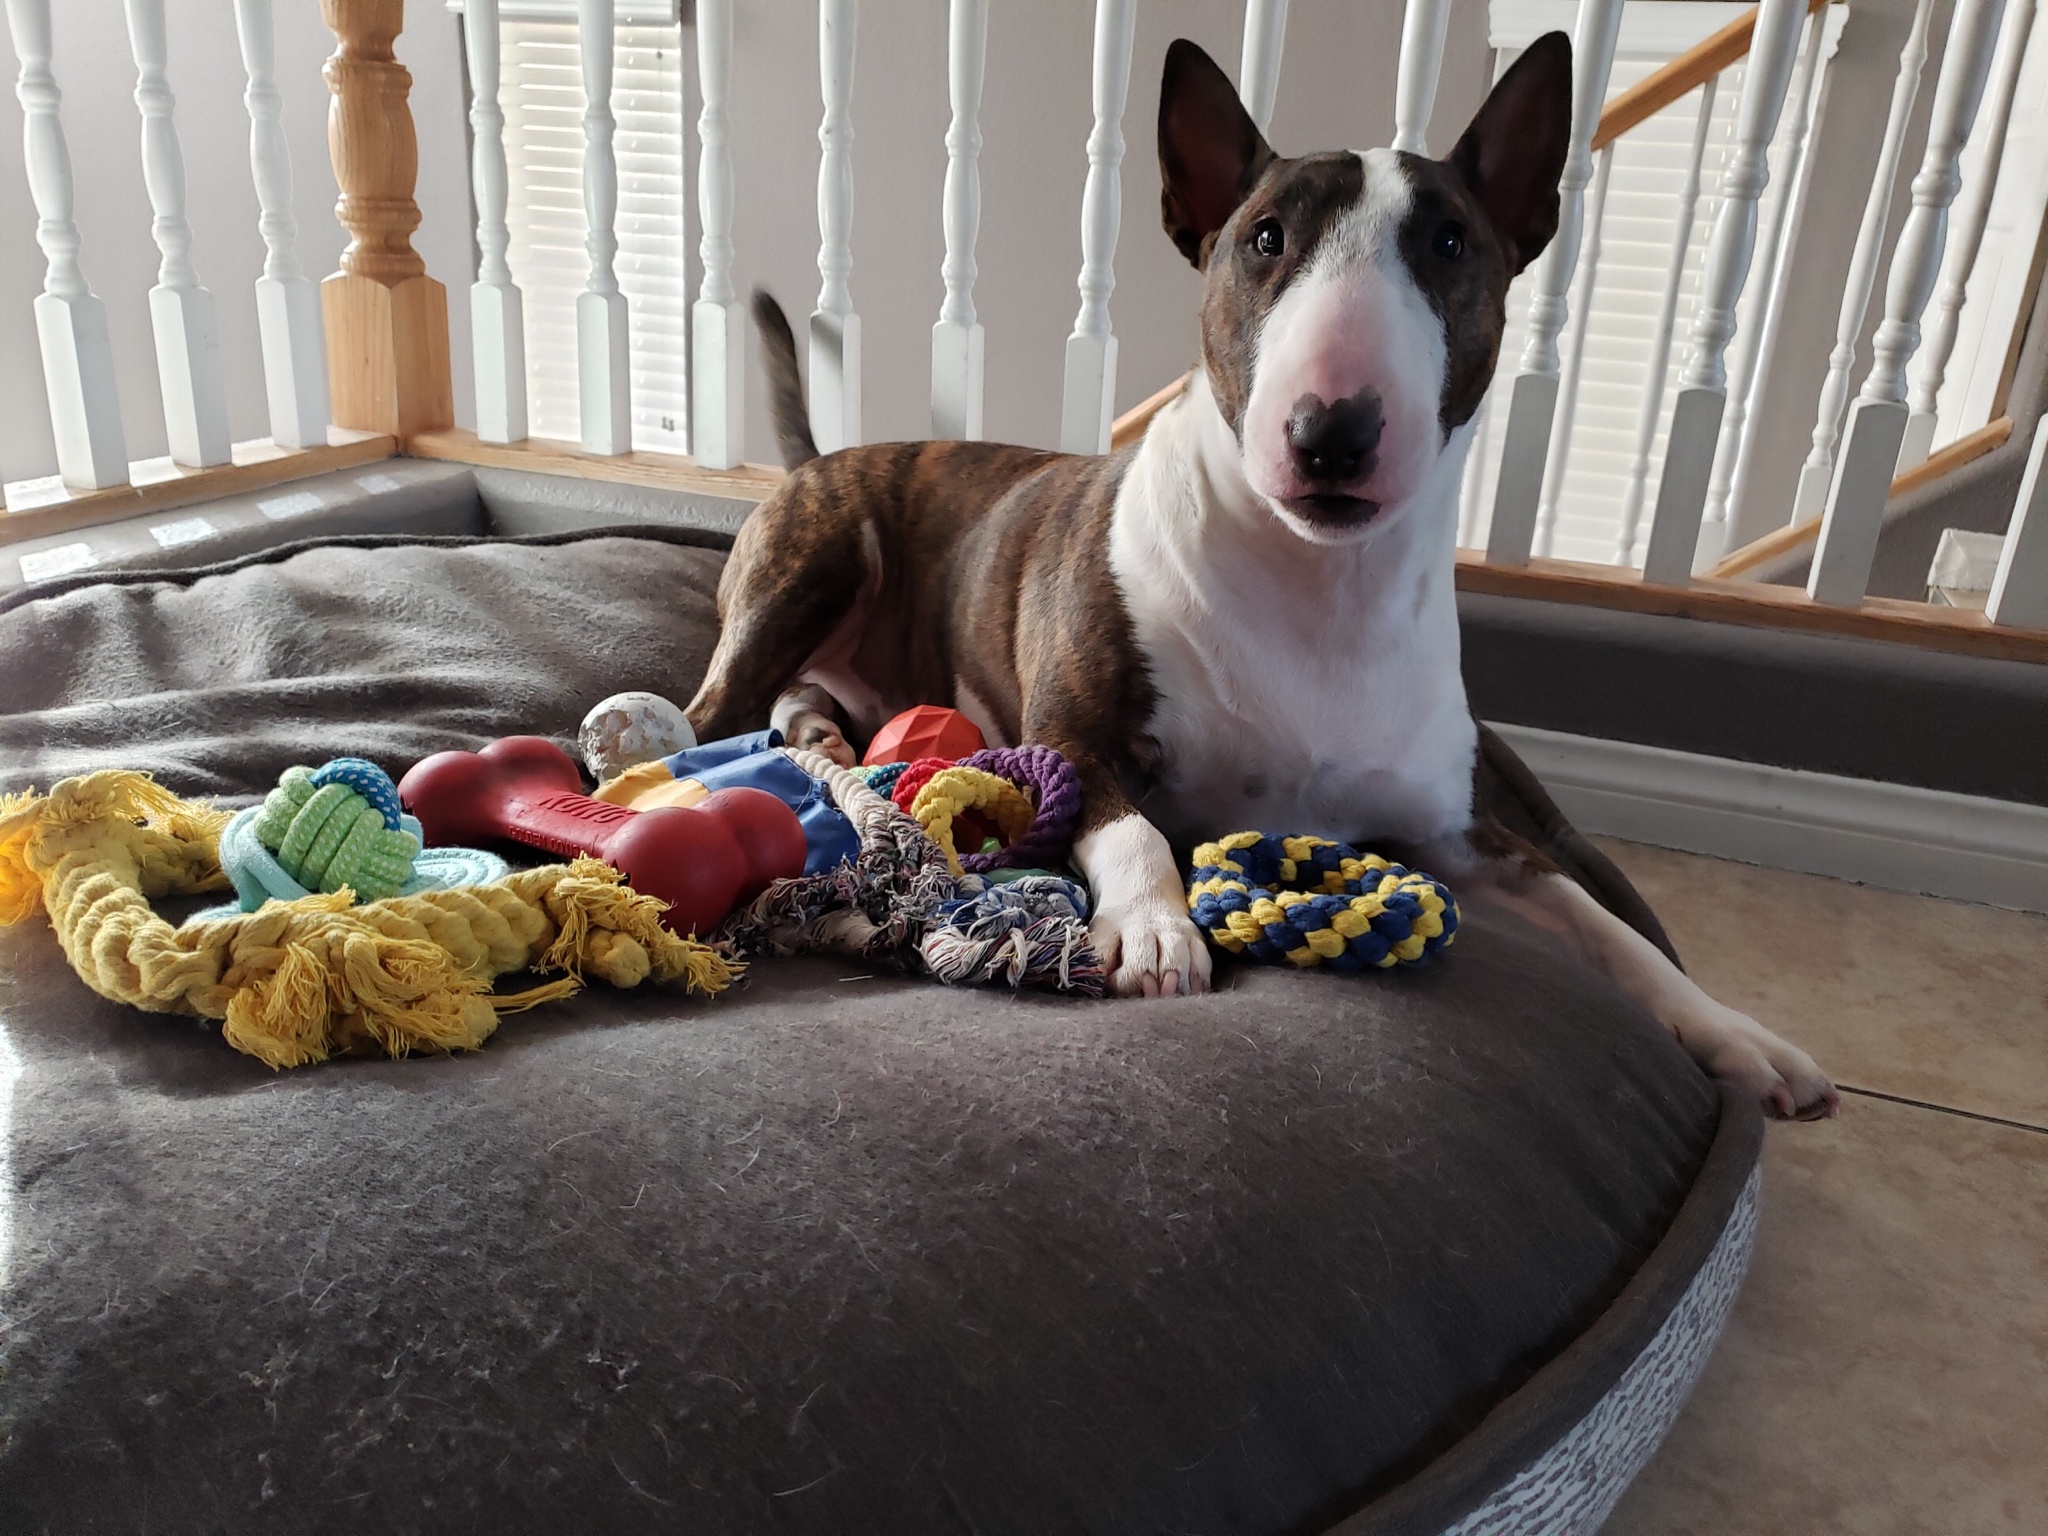 English Bull Terrier on its bed with its toys